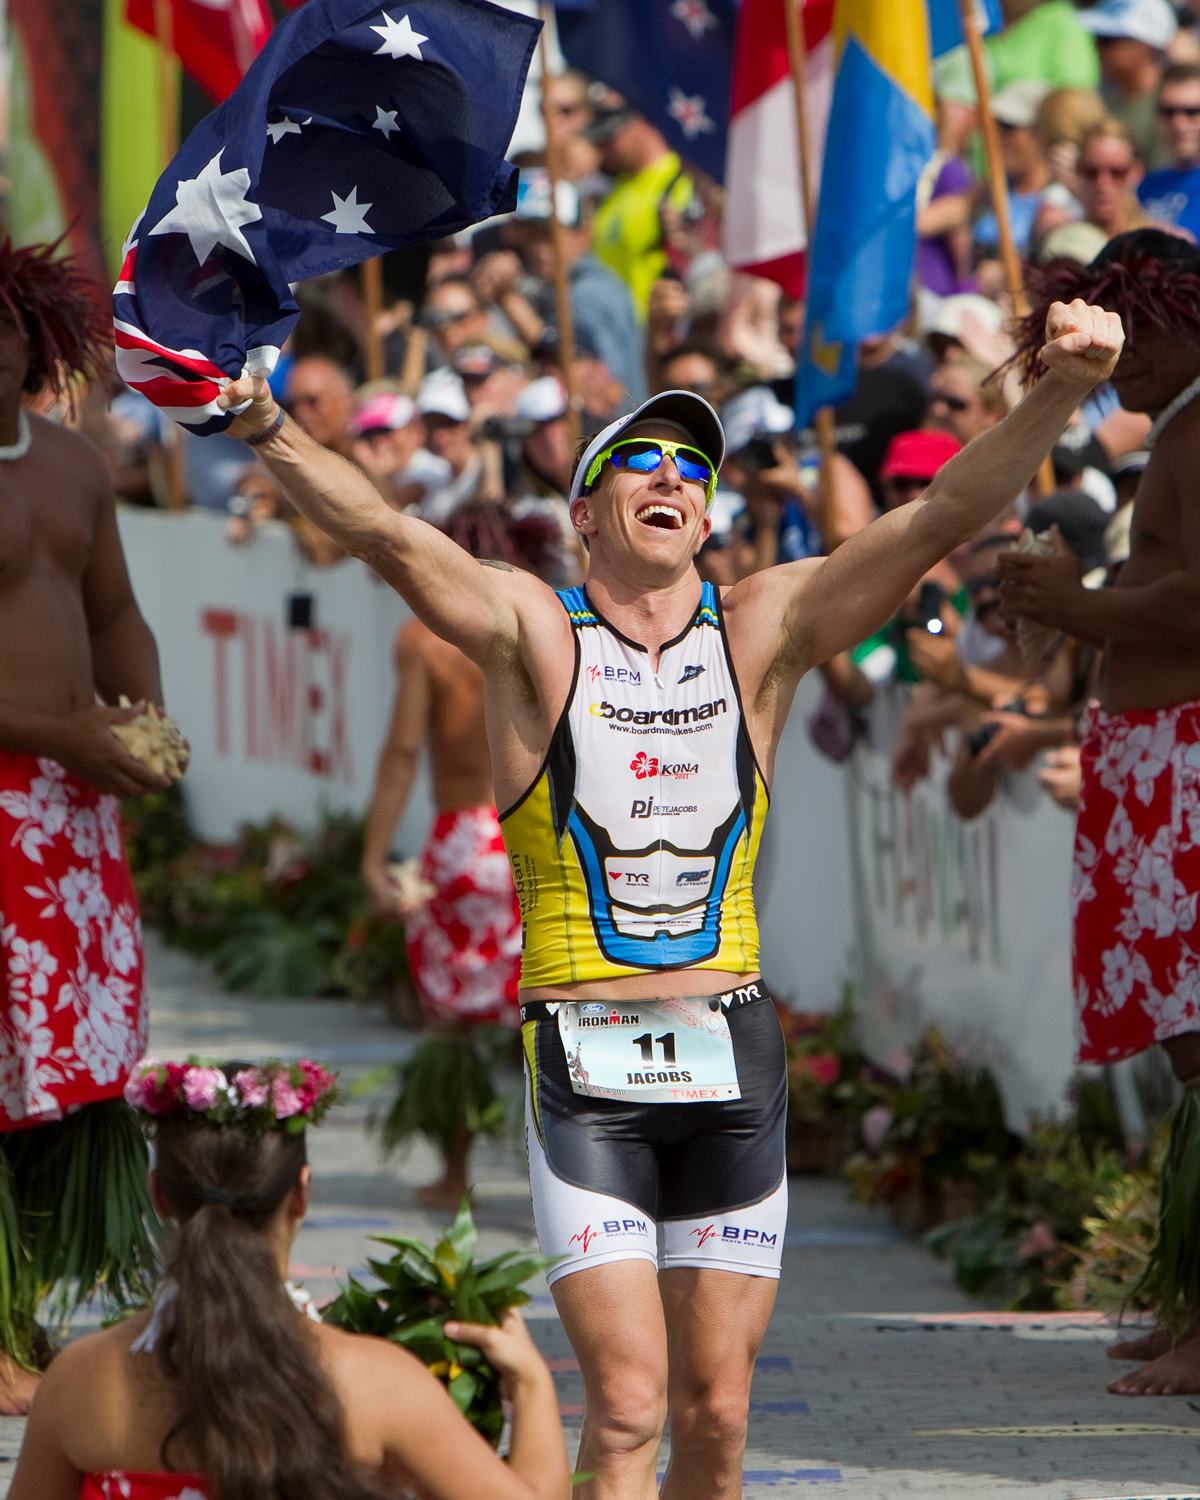 Age Groupers have the chance to train and race with Pete Jacobs in 2012